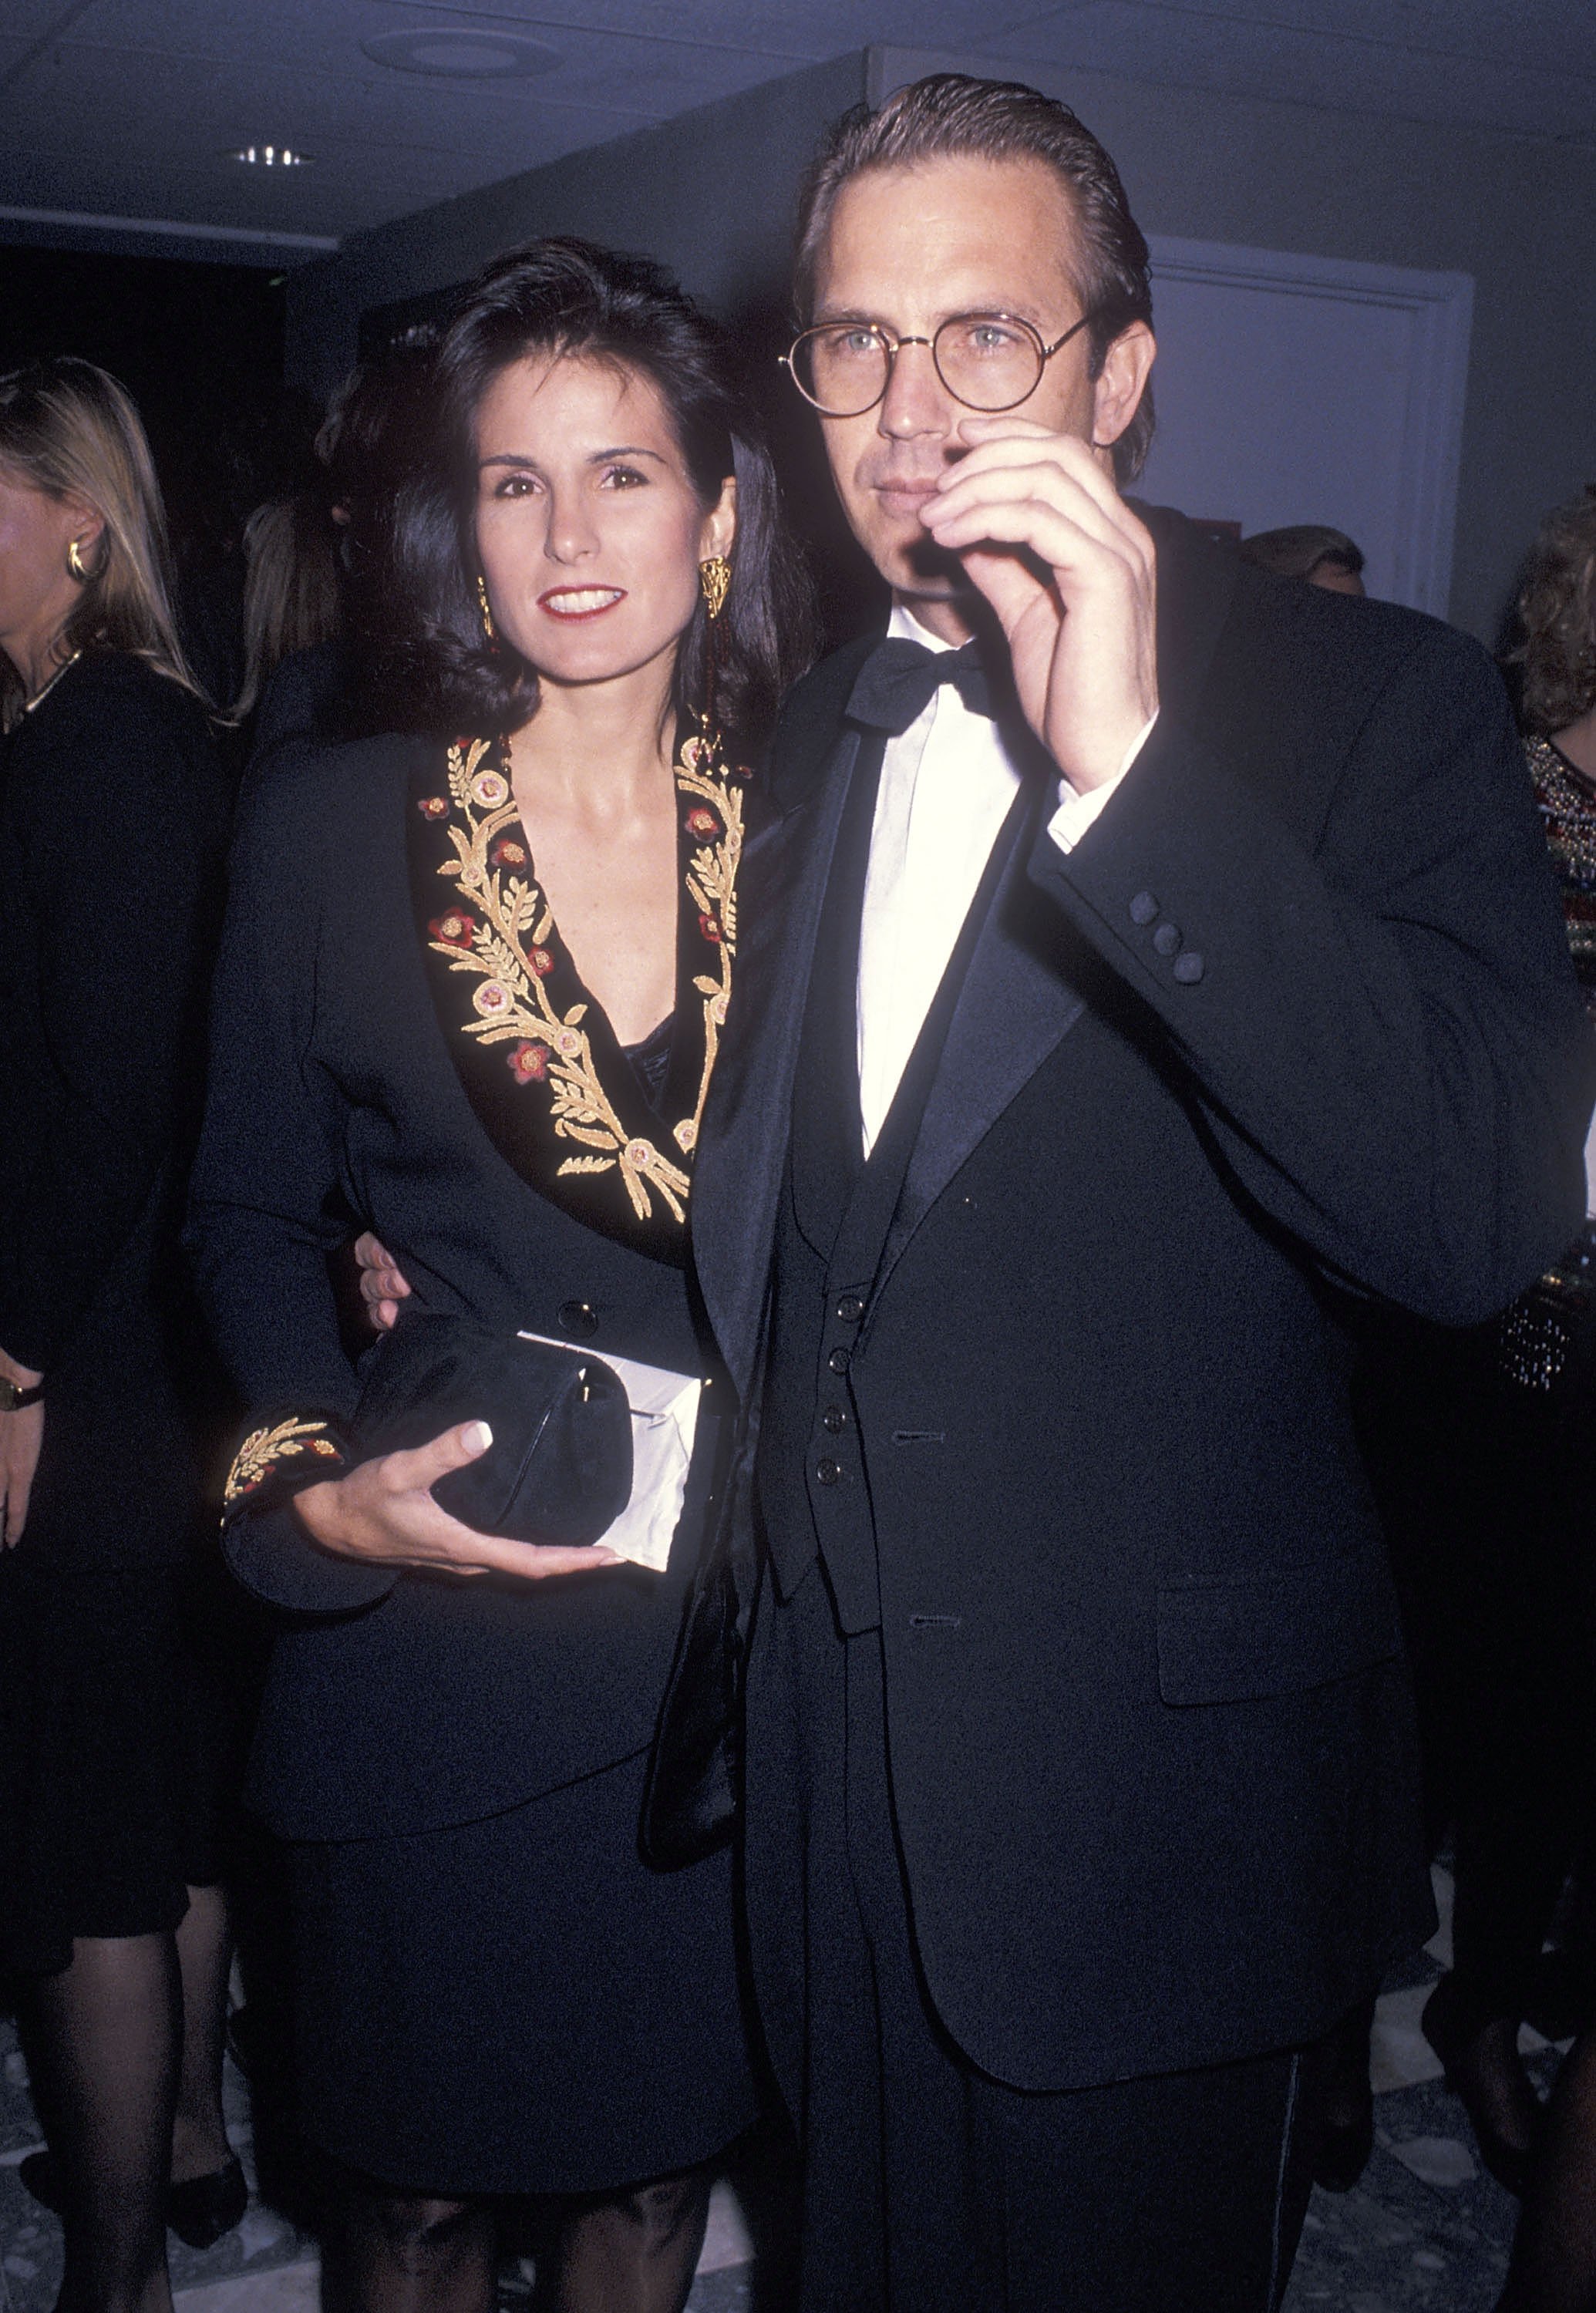 Kevin Costner and Cindy Costner on November 4, 1990, in Century City, California. | Source: Getty Images